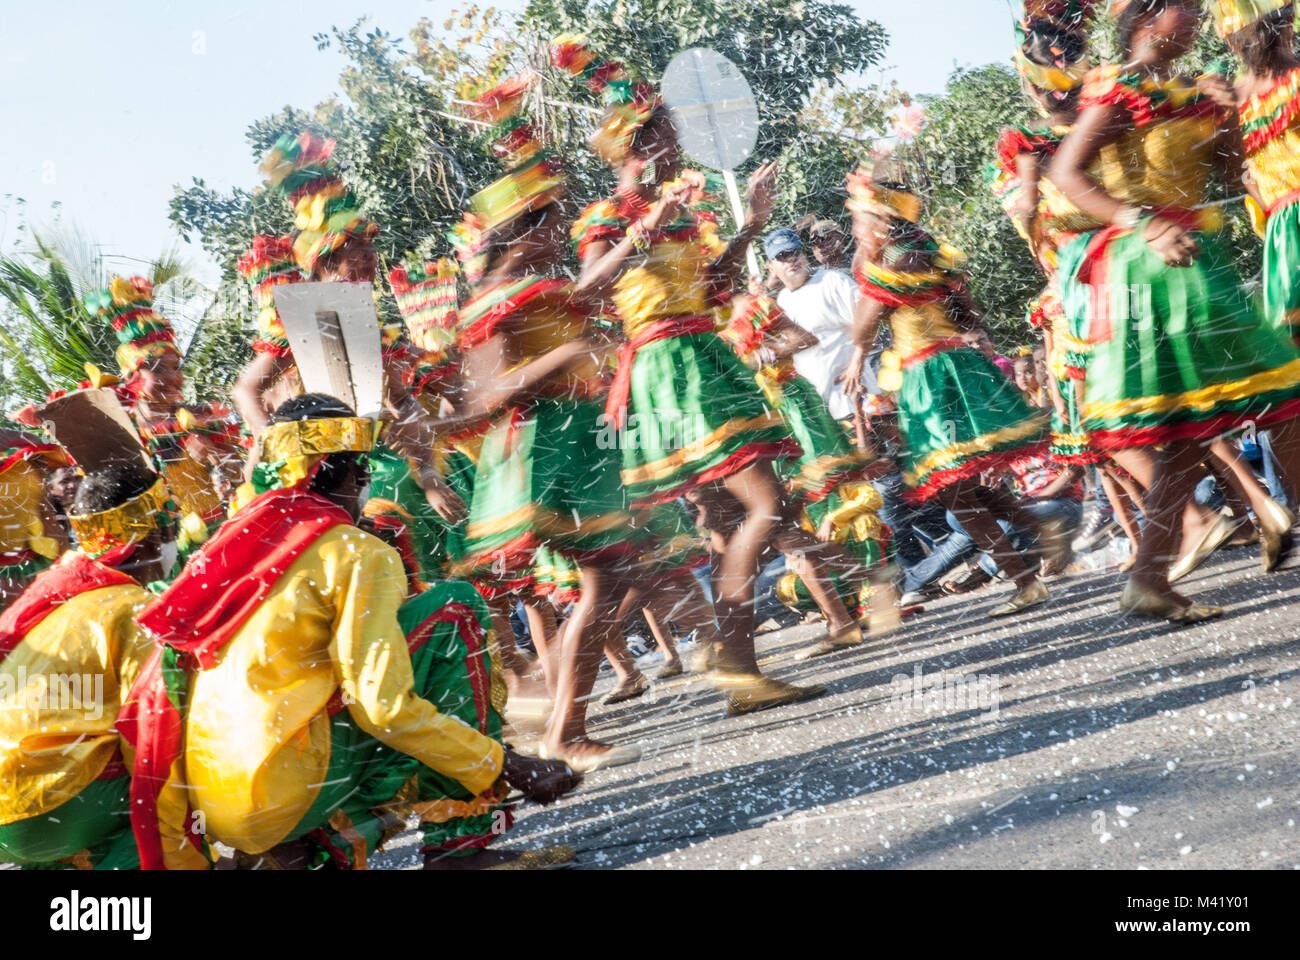 Children wearing colorful costumes dancing and celebrating with confetti during Barranquilla Carnival Stock Photo